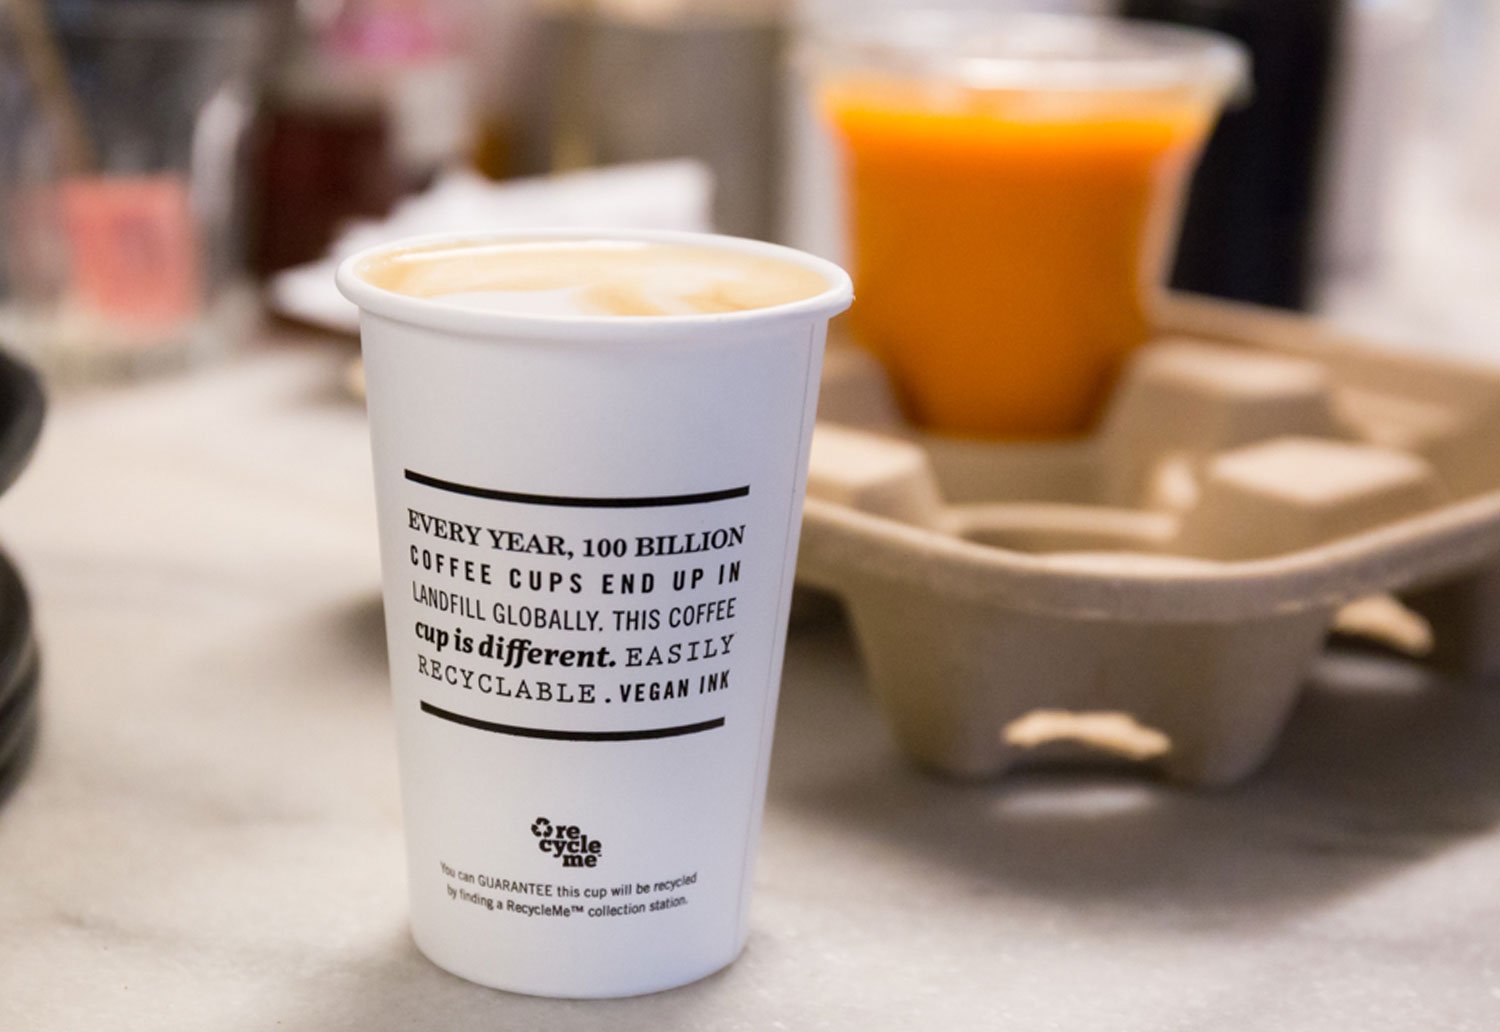 Image of a Detpak RecycleMe cup for takeaway coffee